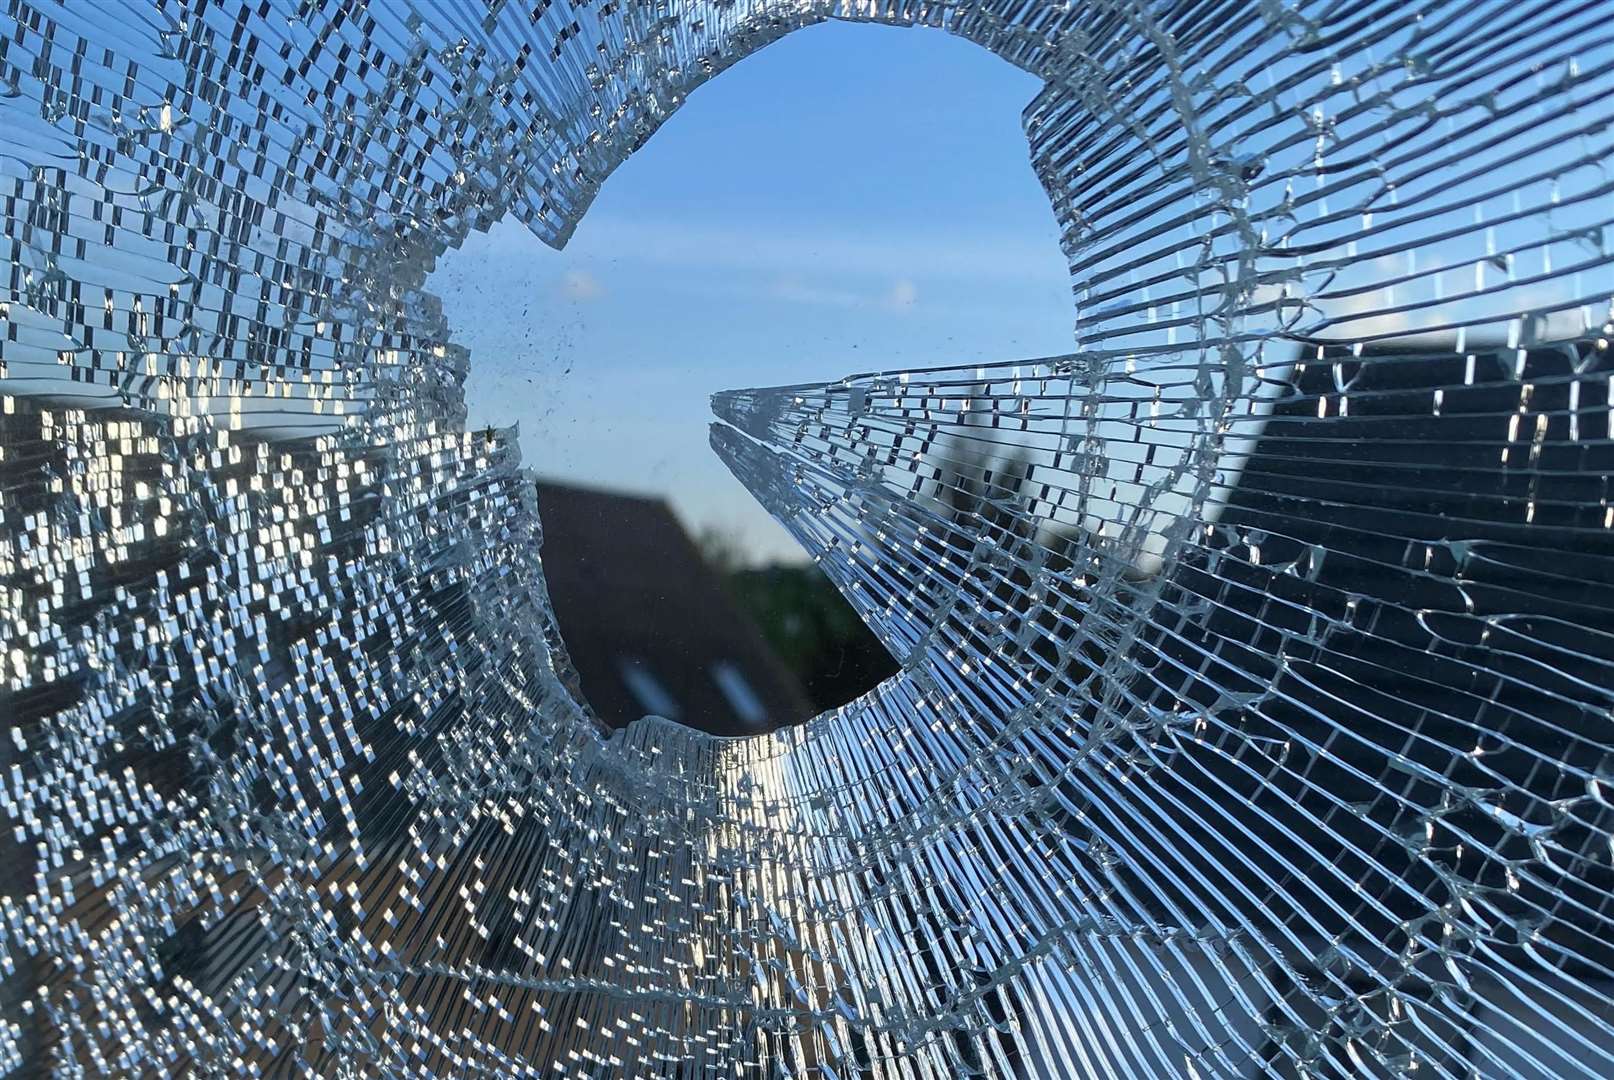 A neighbour's window was reportedly smashed in the incident